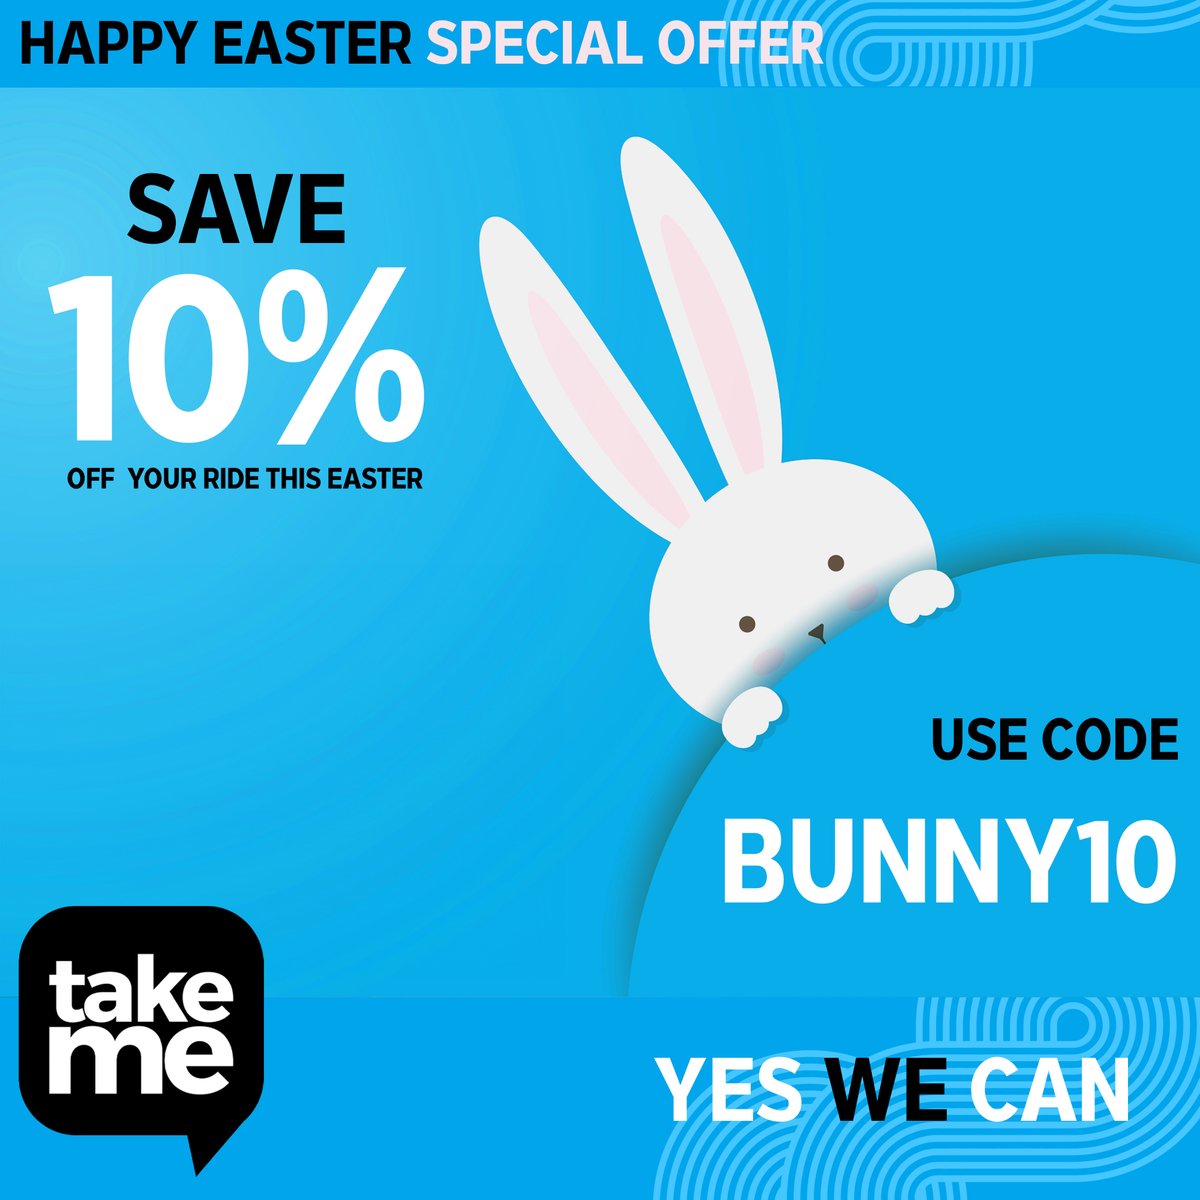 Be a Happy Bunny this Easter… 🐇 Save 10% OFF your next Take Me, use promo code BUNNY10 Download our app here : tkme.uk/apps Happy Easter from all of the Take Me Team! #TakeMe #Easter #Offer #discount